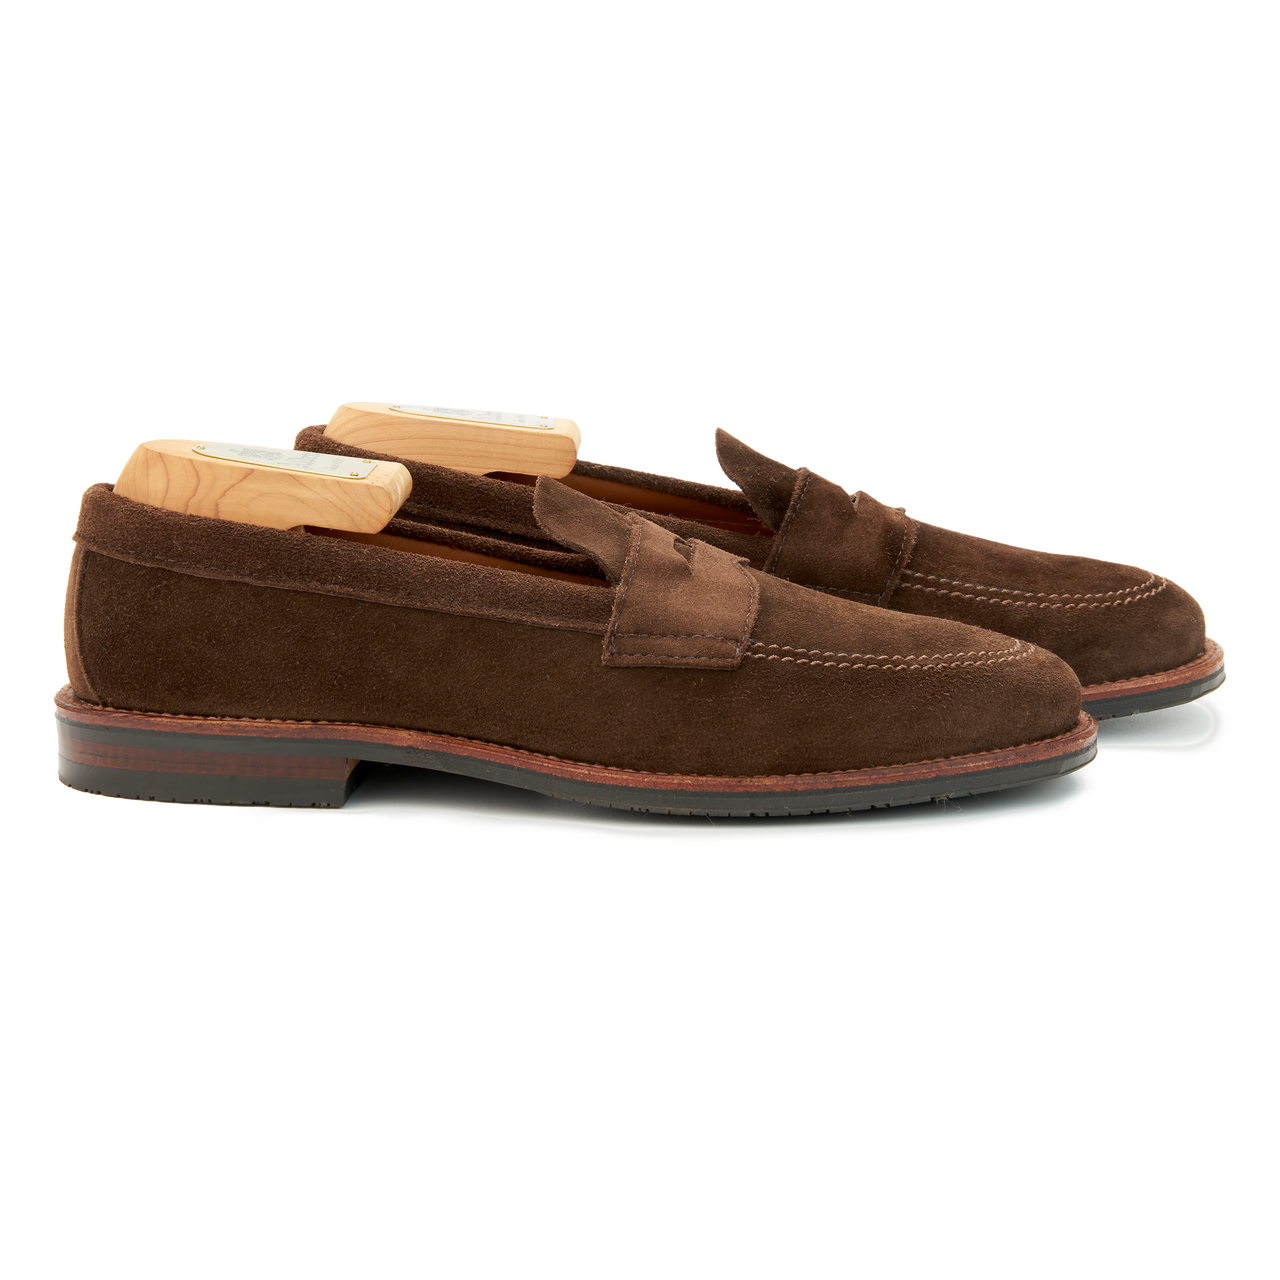 Alden Unlined Penny Loafer in Humus Suede with Rubber Sole